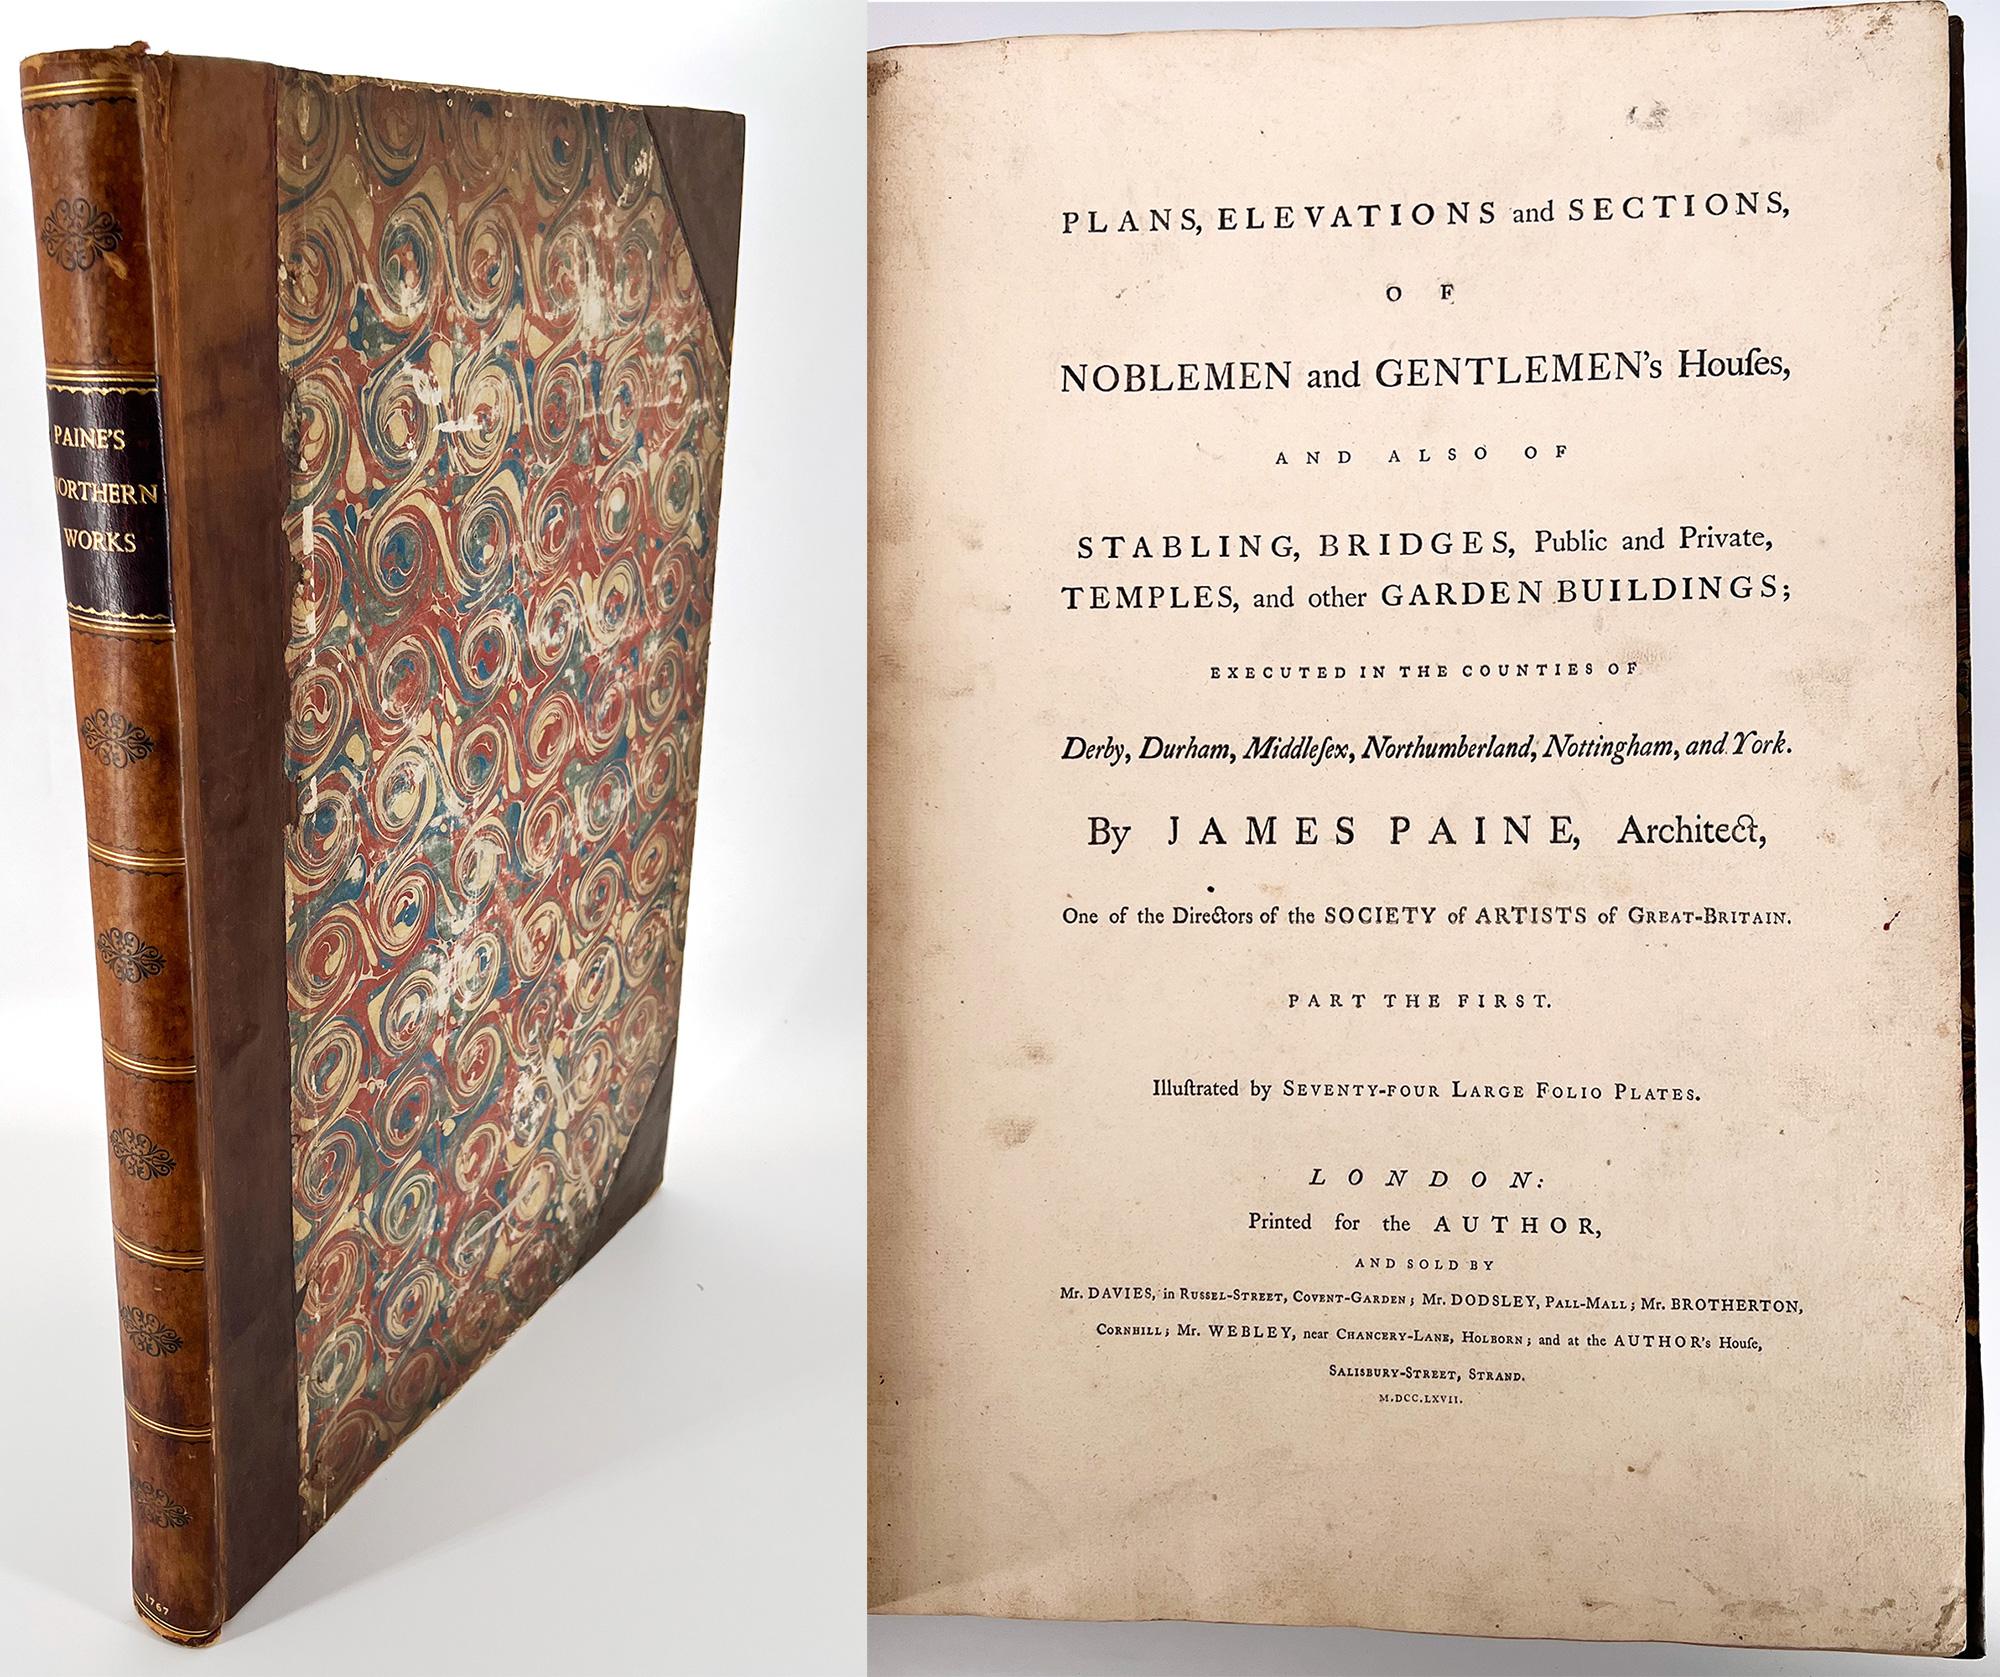 A fine FIRST EDITION ELEPHANT FOLIO of Jame's Paine monumental work: 
Plans, Elevations and Section of Noblemen and Gentlemen's Houses, and also of Stabling, Bridges, Public and Private, Temples, and other Garden Buildings; Executed in the Counties